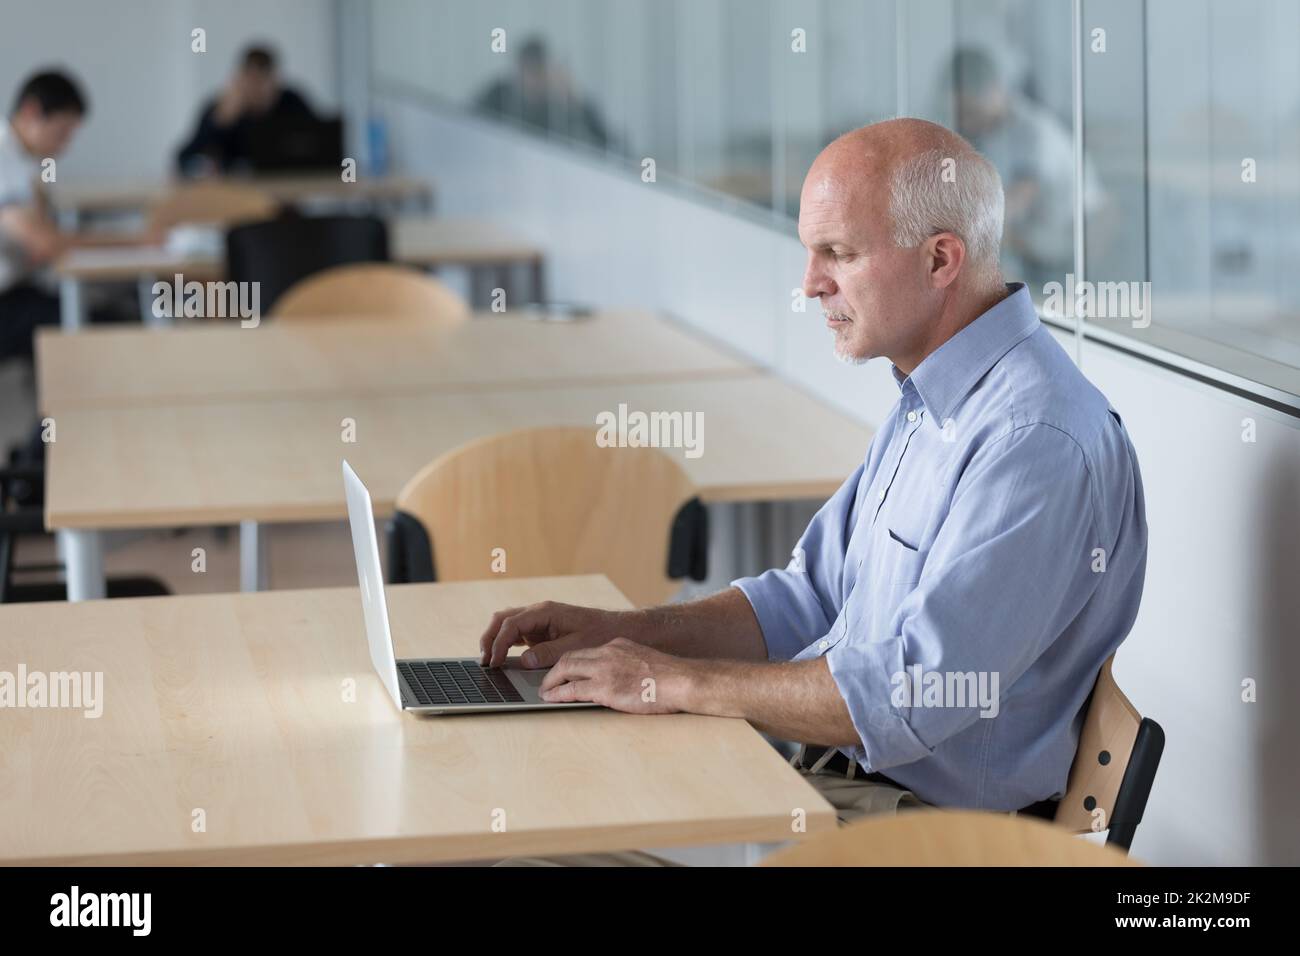 Senior man engrossed in working on a laptop Stock Photo